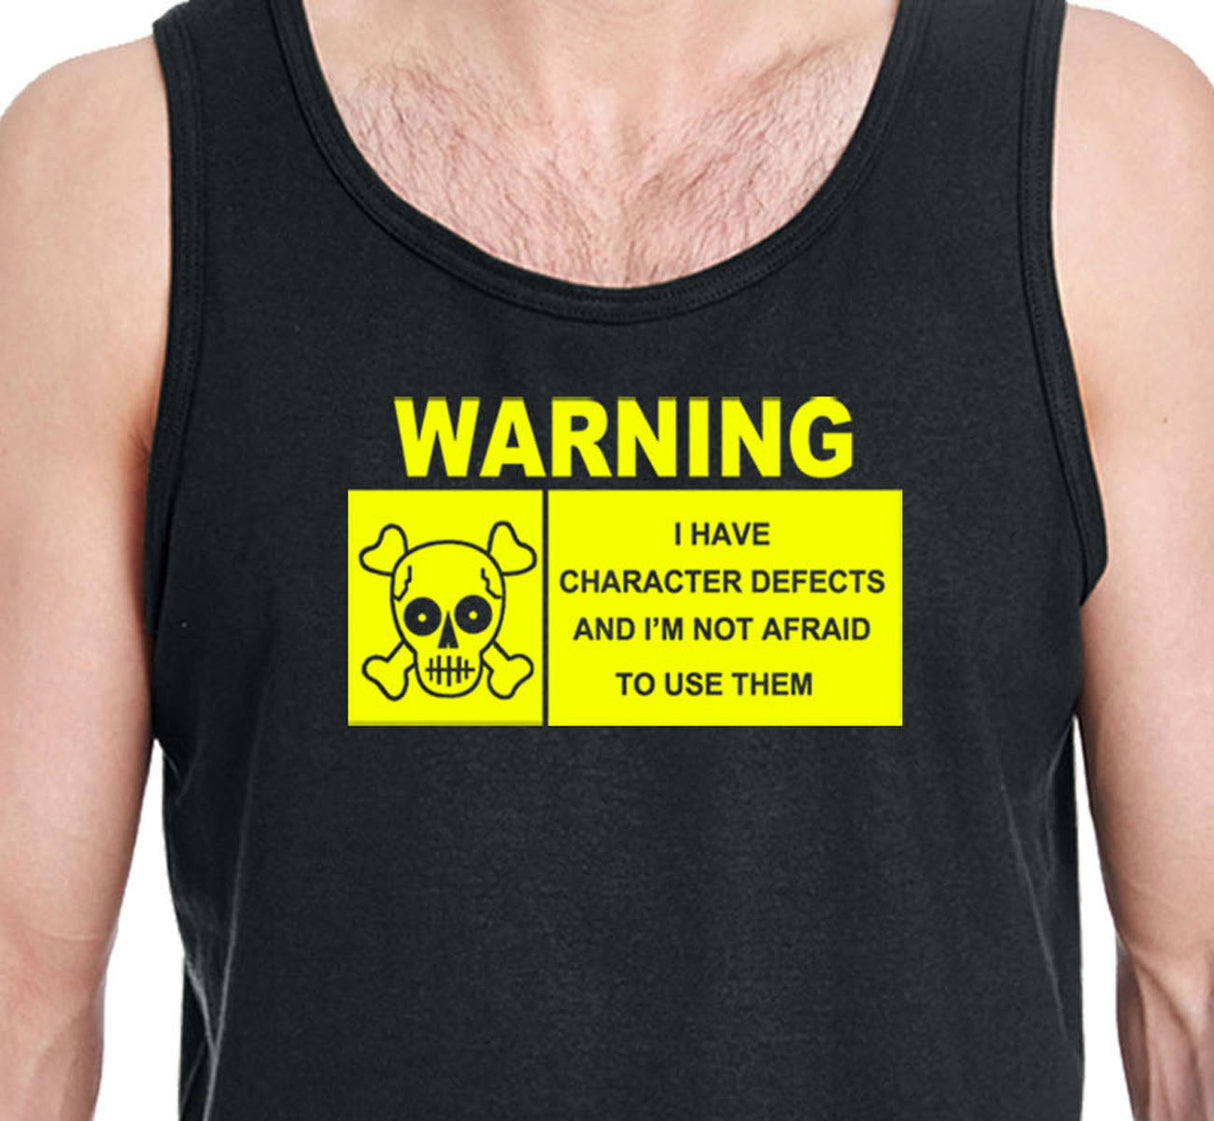 WARNING I HAVE DEFECTS Unisex  Tank Tops